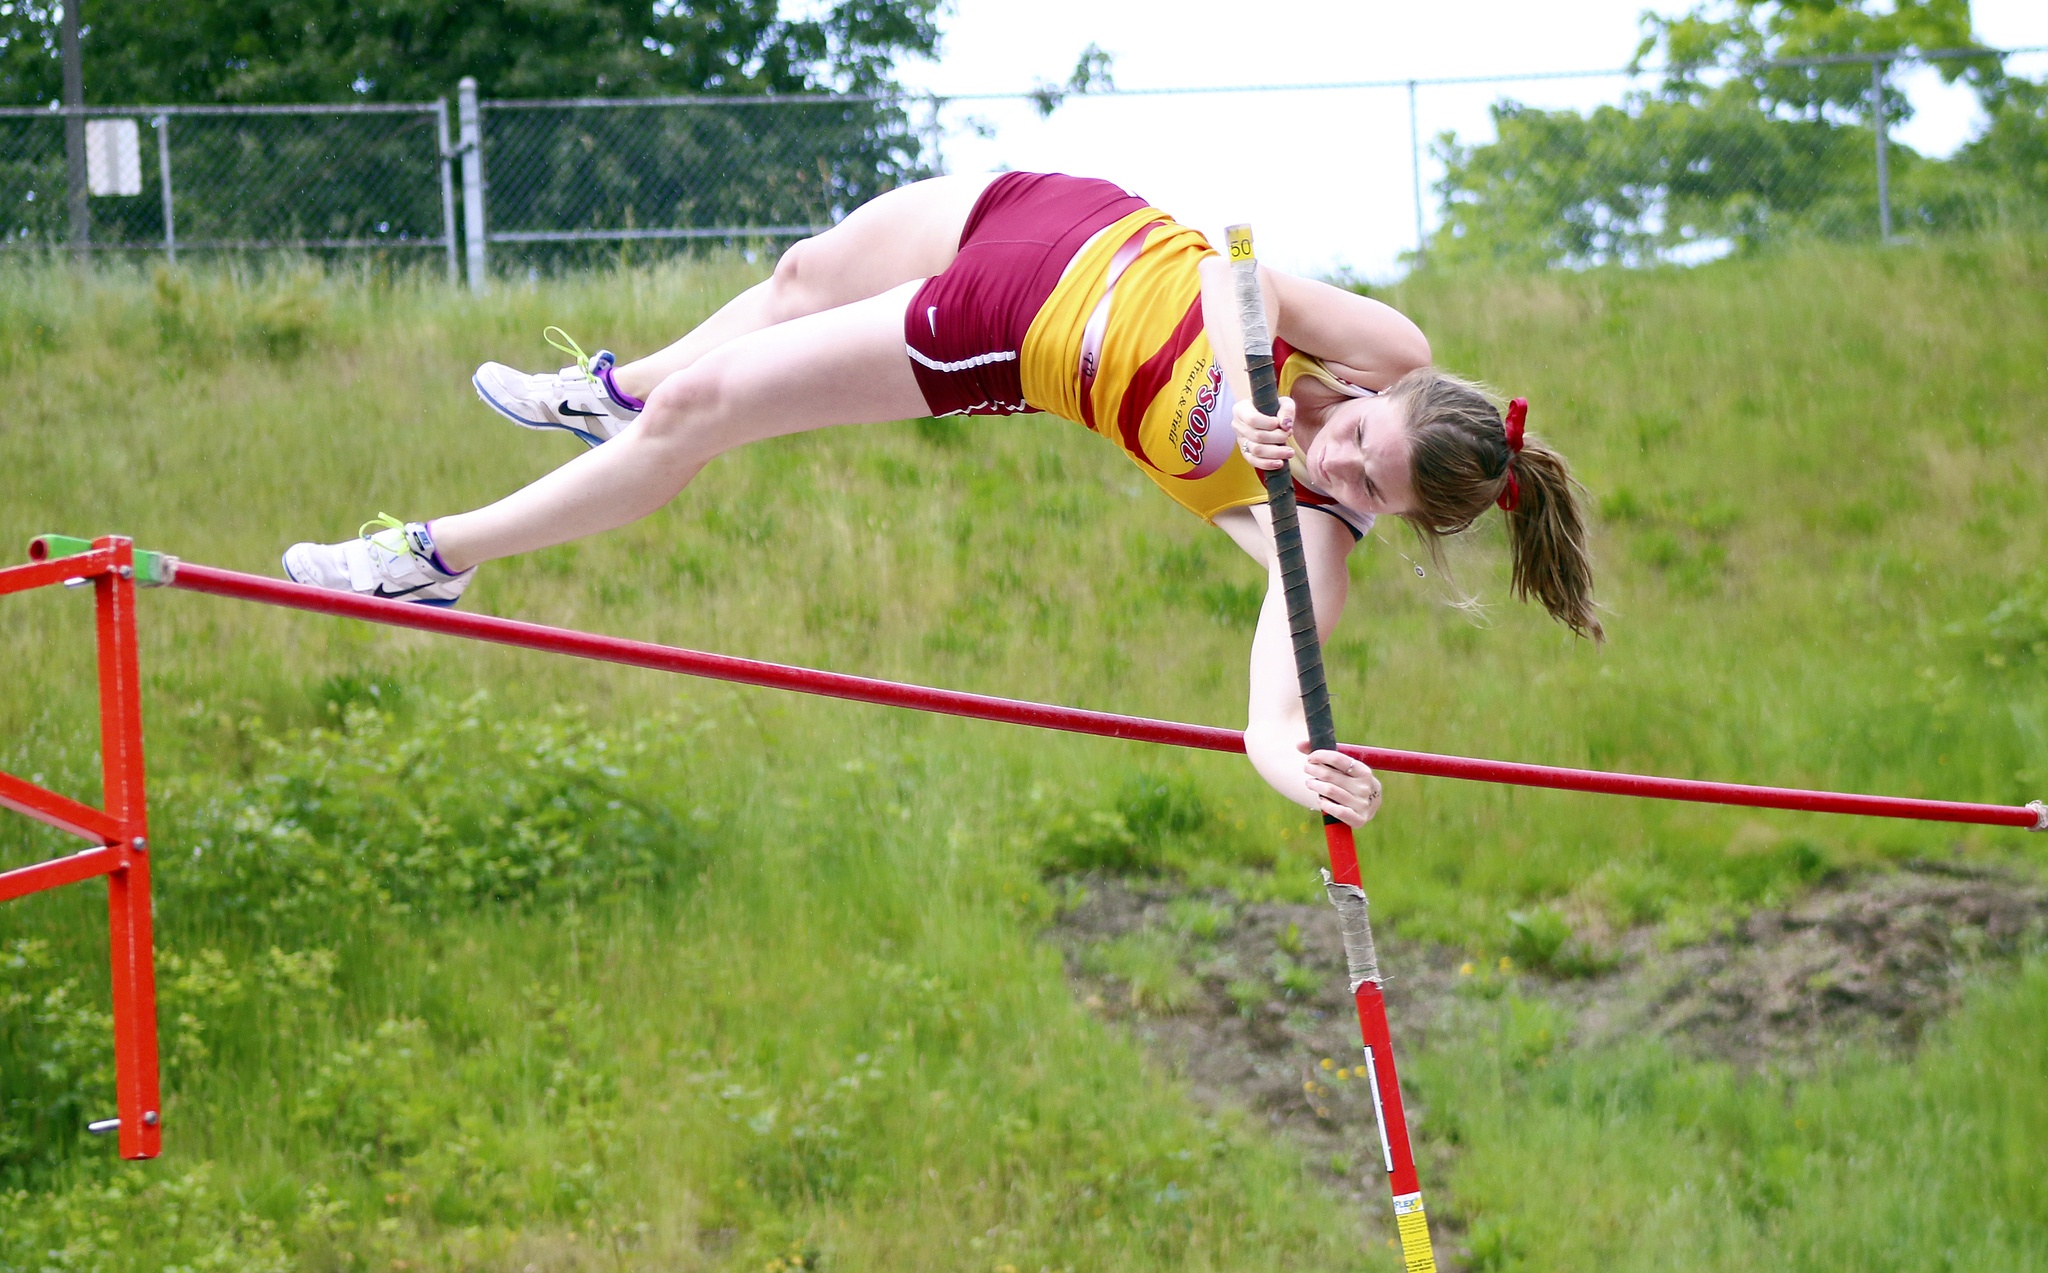 Jenna Appleton cleared 11-0 to win the pole vault event at the West Central/Southwest bi-district track and field meet on Thursday